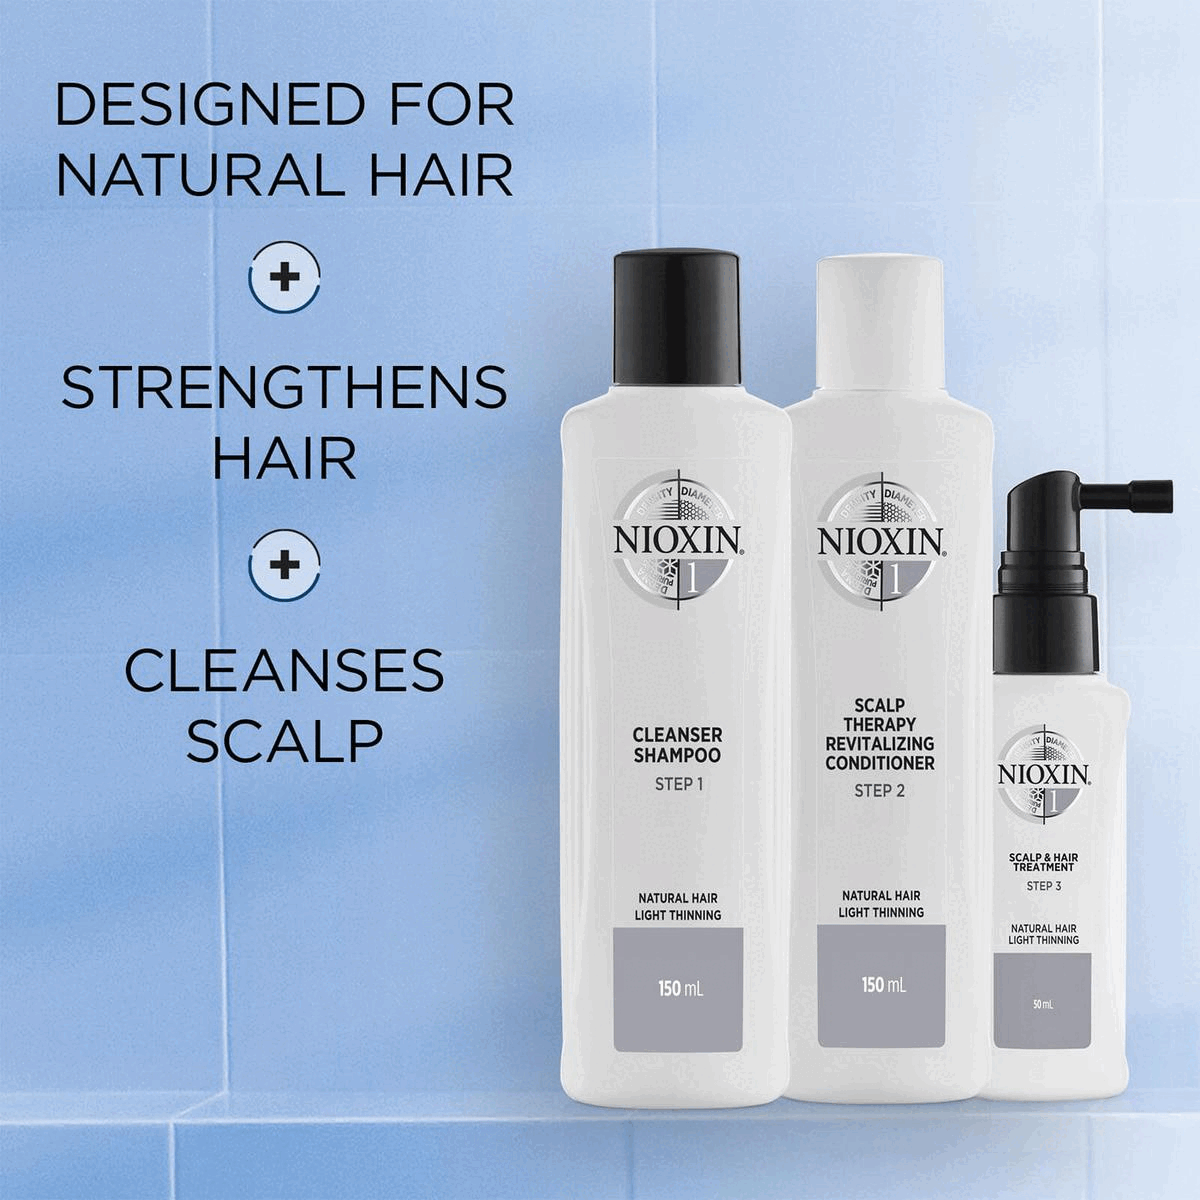 Provides colour protection + strengthens hair + cleanses scalpHow to use Nioxin System Kit No.2 for natural hair with light thinning. 
              Step 1 cleanser shampoo: gently massage into hair and scalp, rinse well. 
              Step 2 Scalp Therapy revitalising conditioner: apply from scalp to ends, leave in for 1 to 3 minutes. Rinse.
              Step 3 Scalp & Hair Treatment: Shake well. Apply evenly to entire scalp. Do not rinse.Trial Size Kit - Daily Use 30 Days.
              Full Size Kit - Daily Use 90 days Dermatologically tested, clinically proven - Dr Caroline Robinson, MD, FAAD, Board-Certified Dermatologist


              